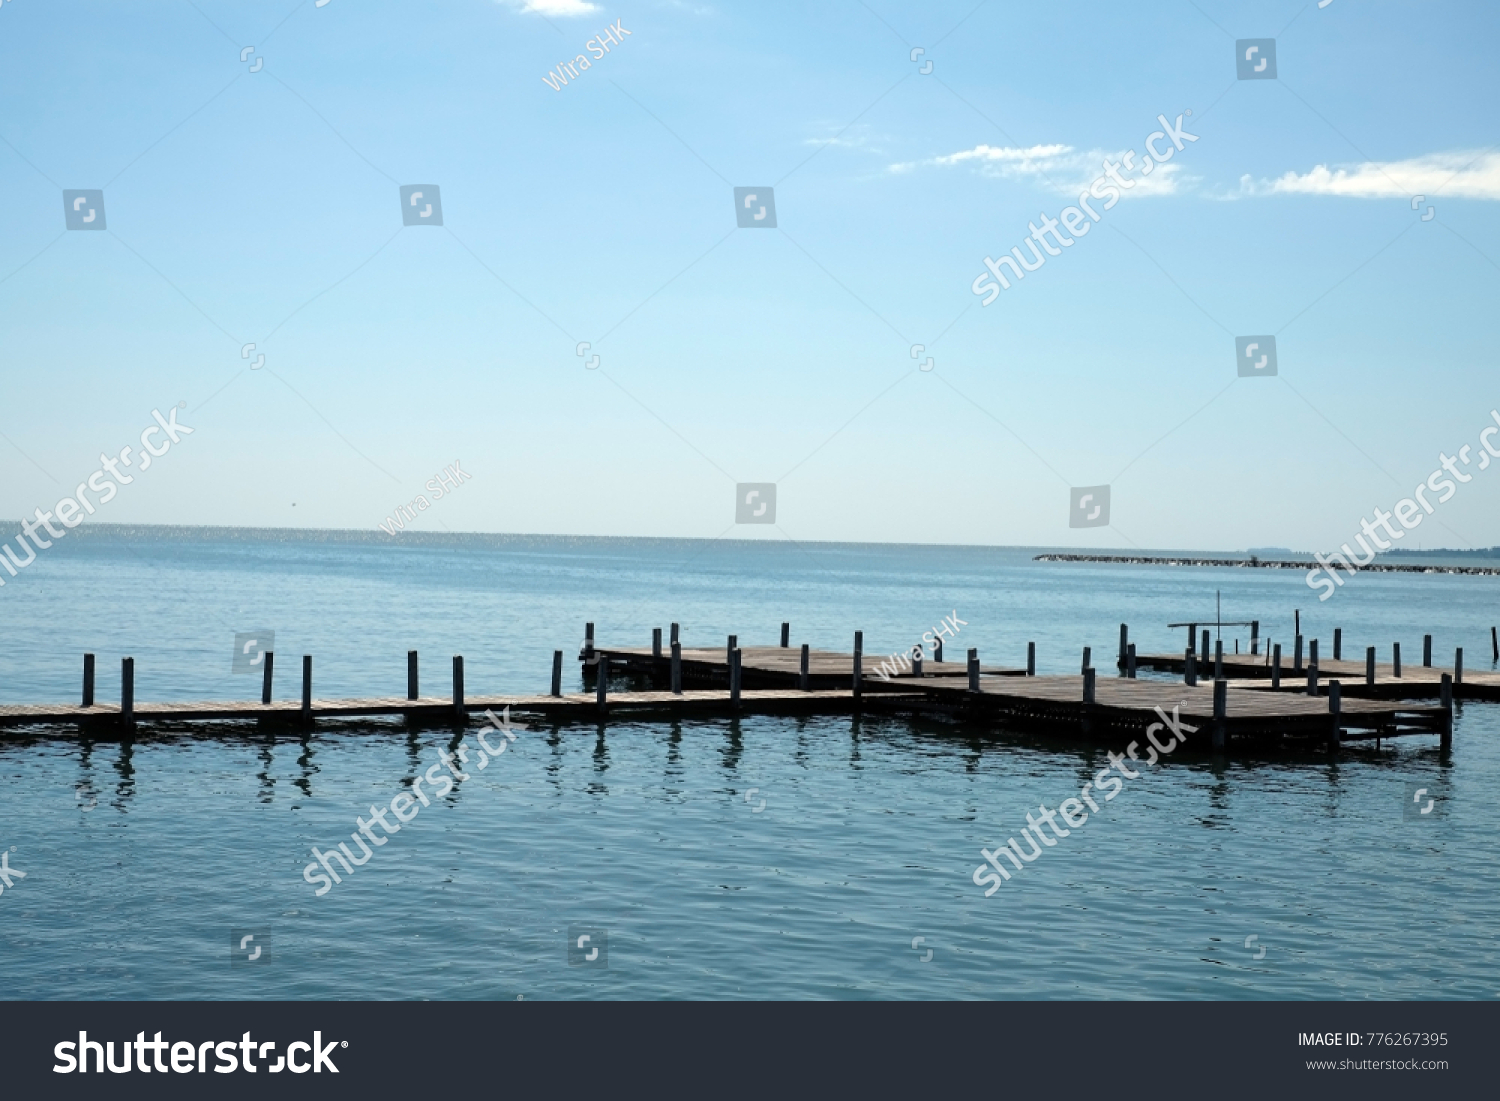 Wood pier, Close up wood pier with blue sky and white clouds image use for sea and transportation background #776267395